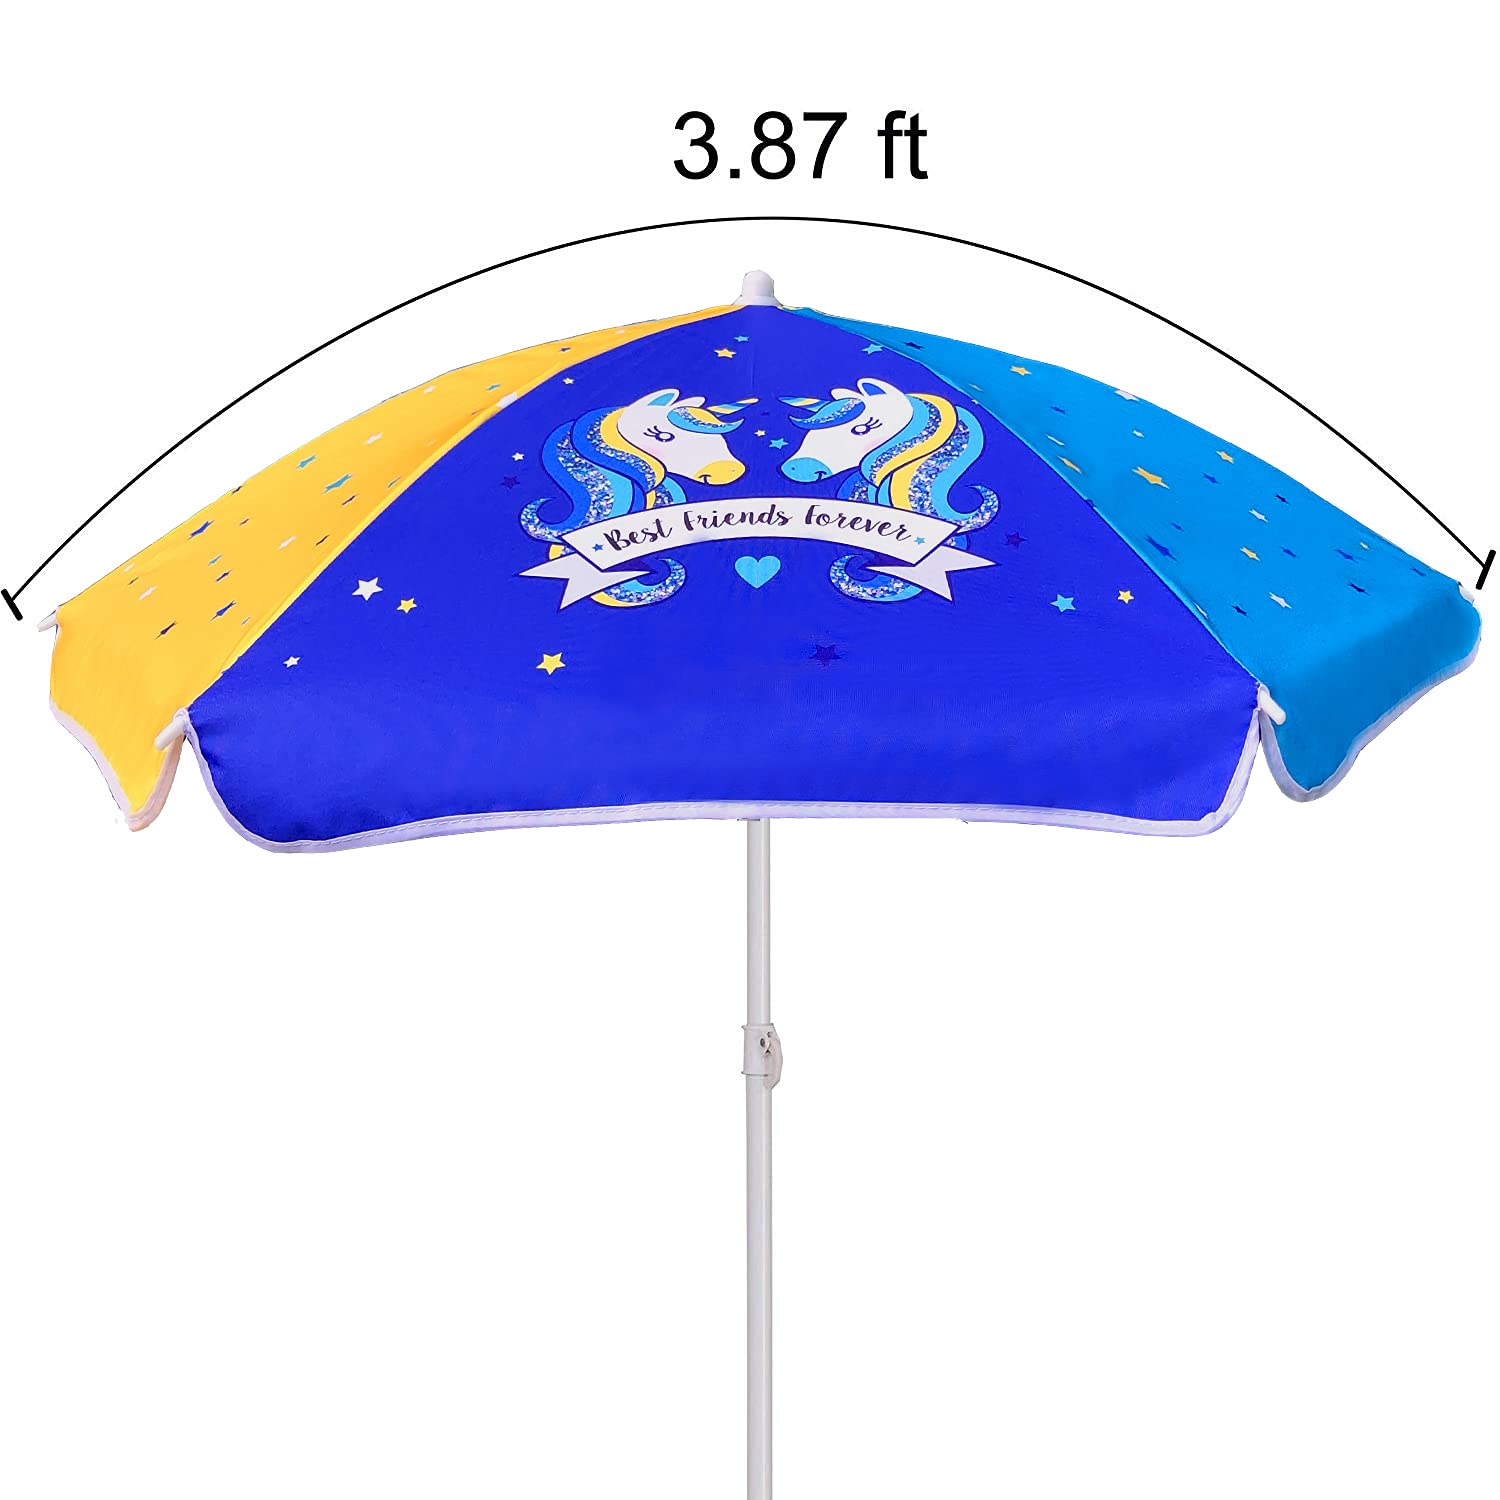 AMMSUN 47 Inch Seaside Beach Umbrella for Sand and Water Table - Kids Durable Umbrellas for children Beach Camping Garden Outdoo